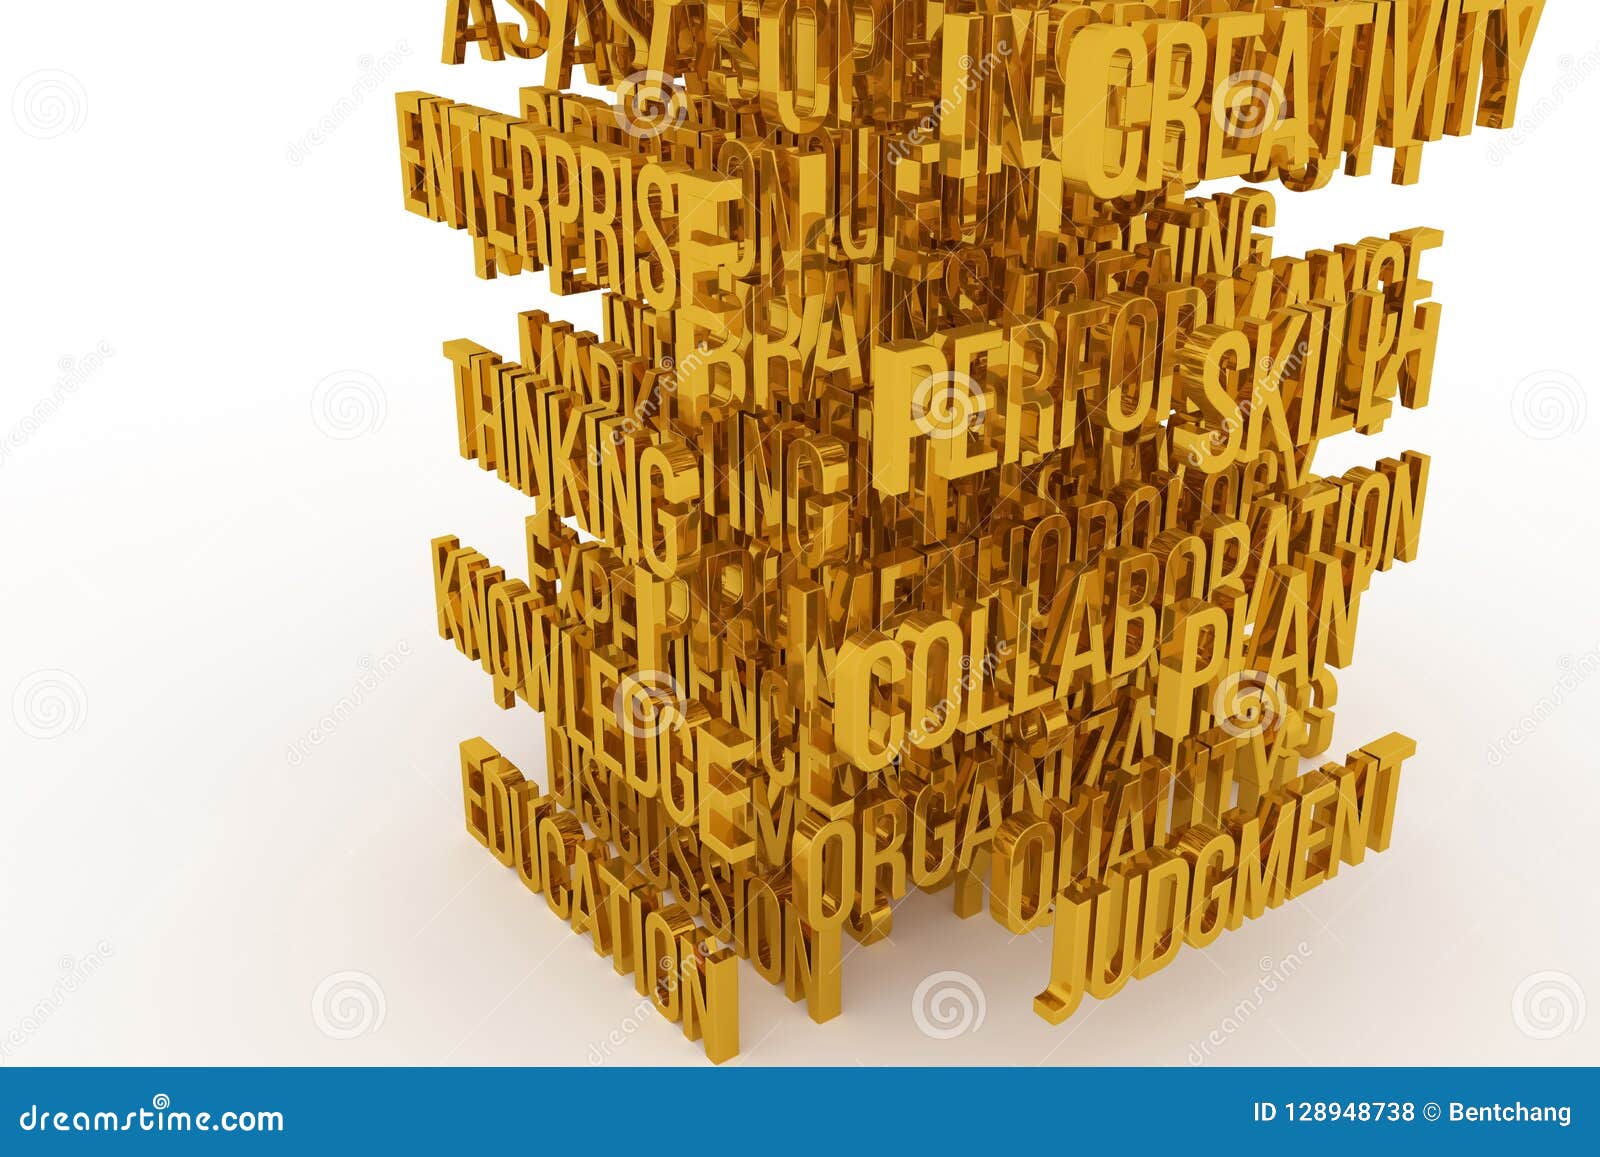 Skill Plan Education Business Conceptual Golden 3d Rendered